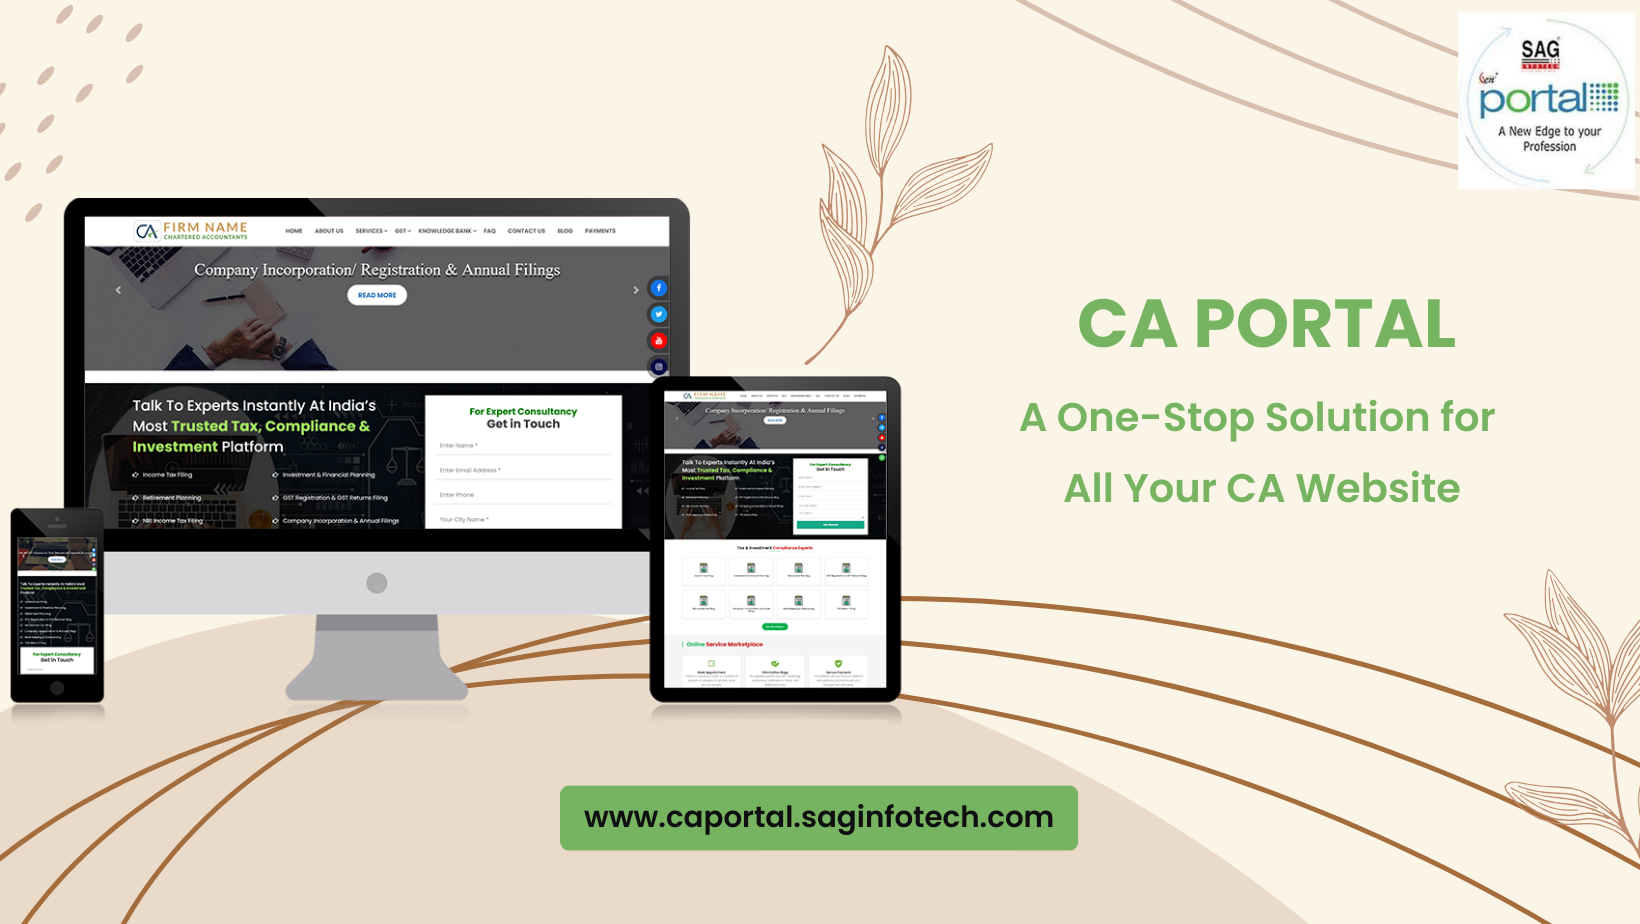 CA Portal: A One-Stop Solution for All Your CA Website